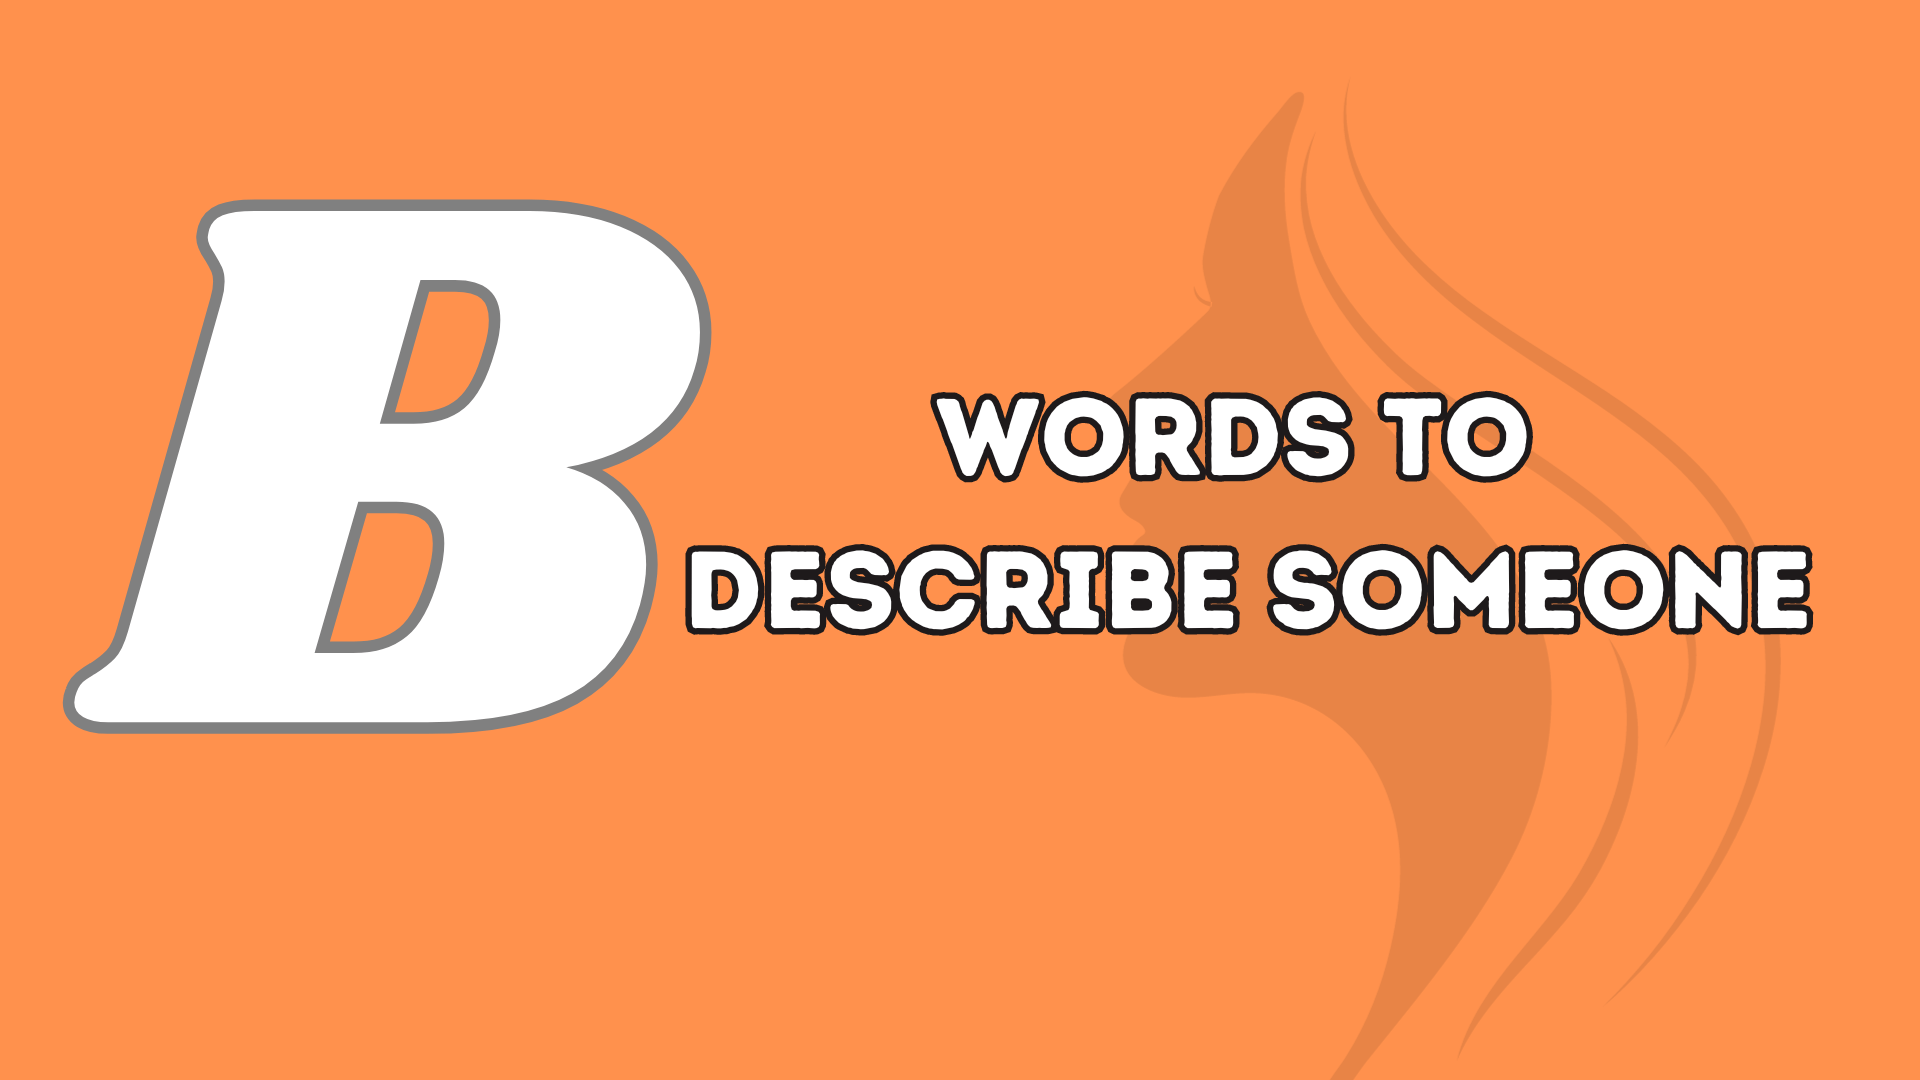 ‘b’ Words To Describe Someone